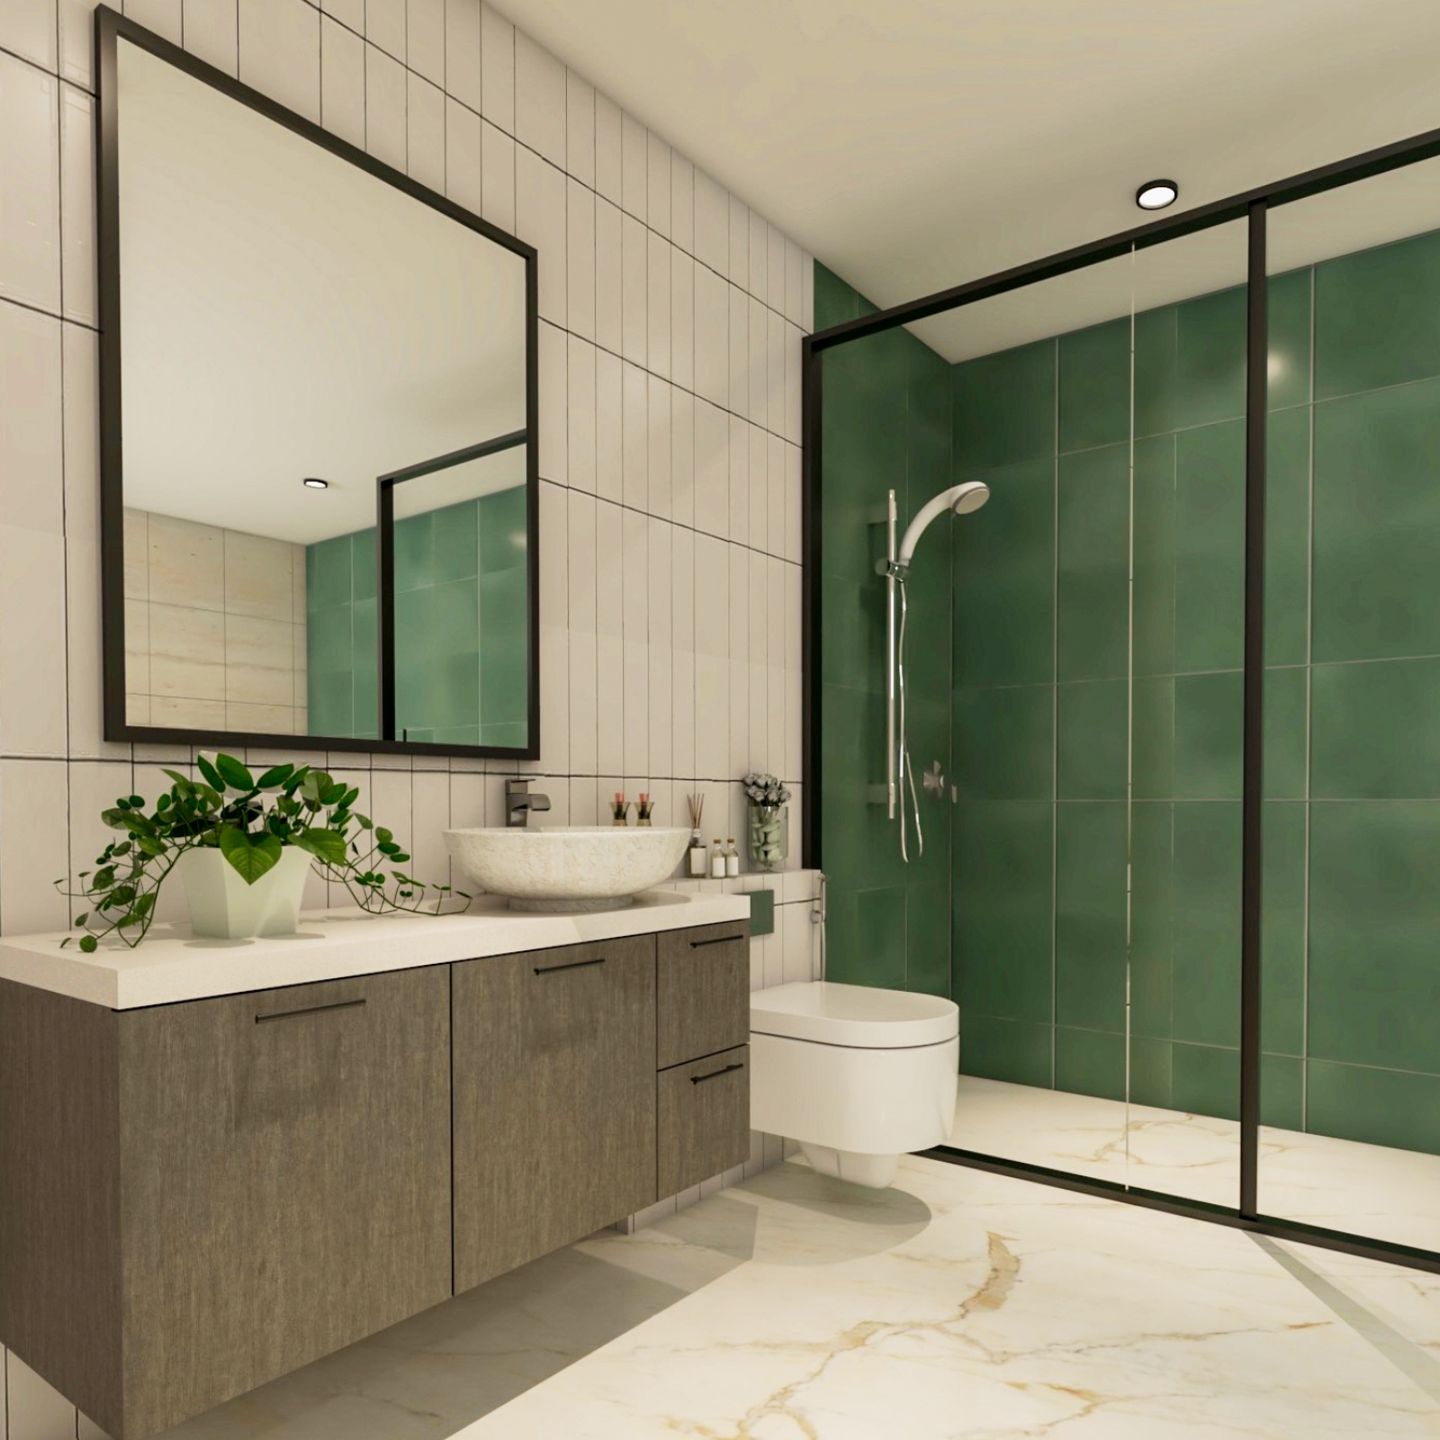 Green And White Bathroom Design With Marble Flooring - Livspace